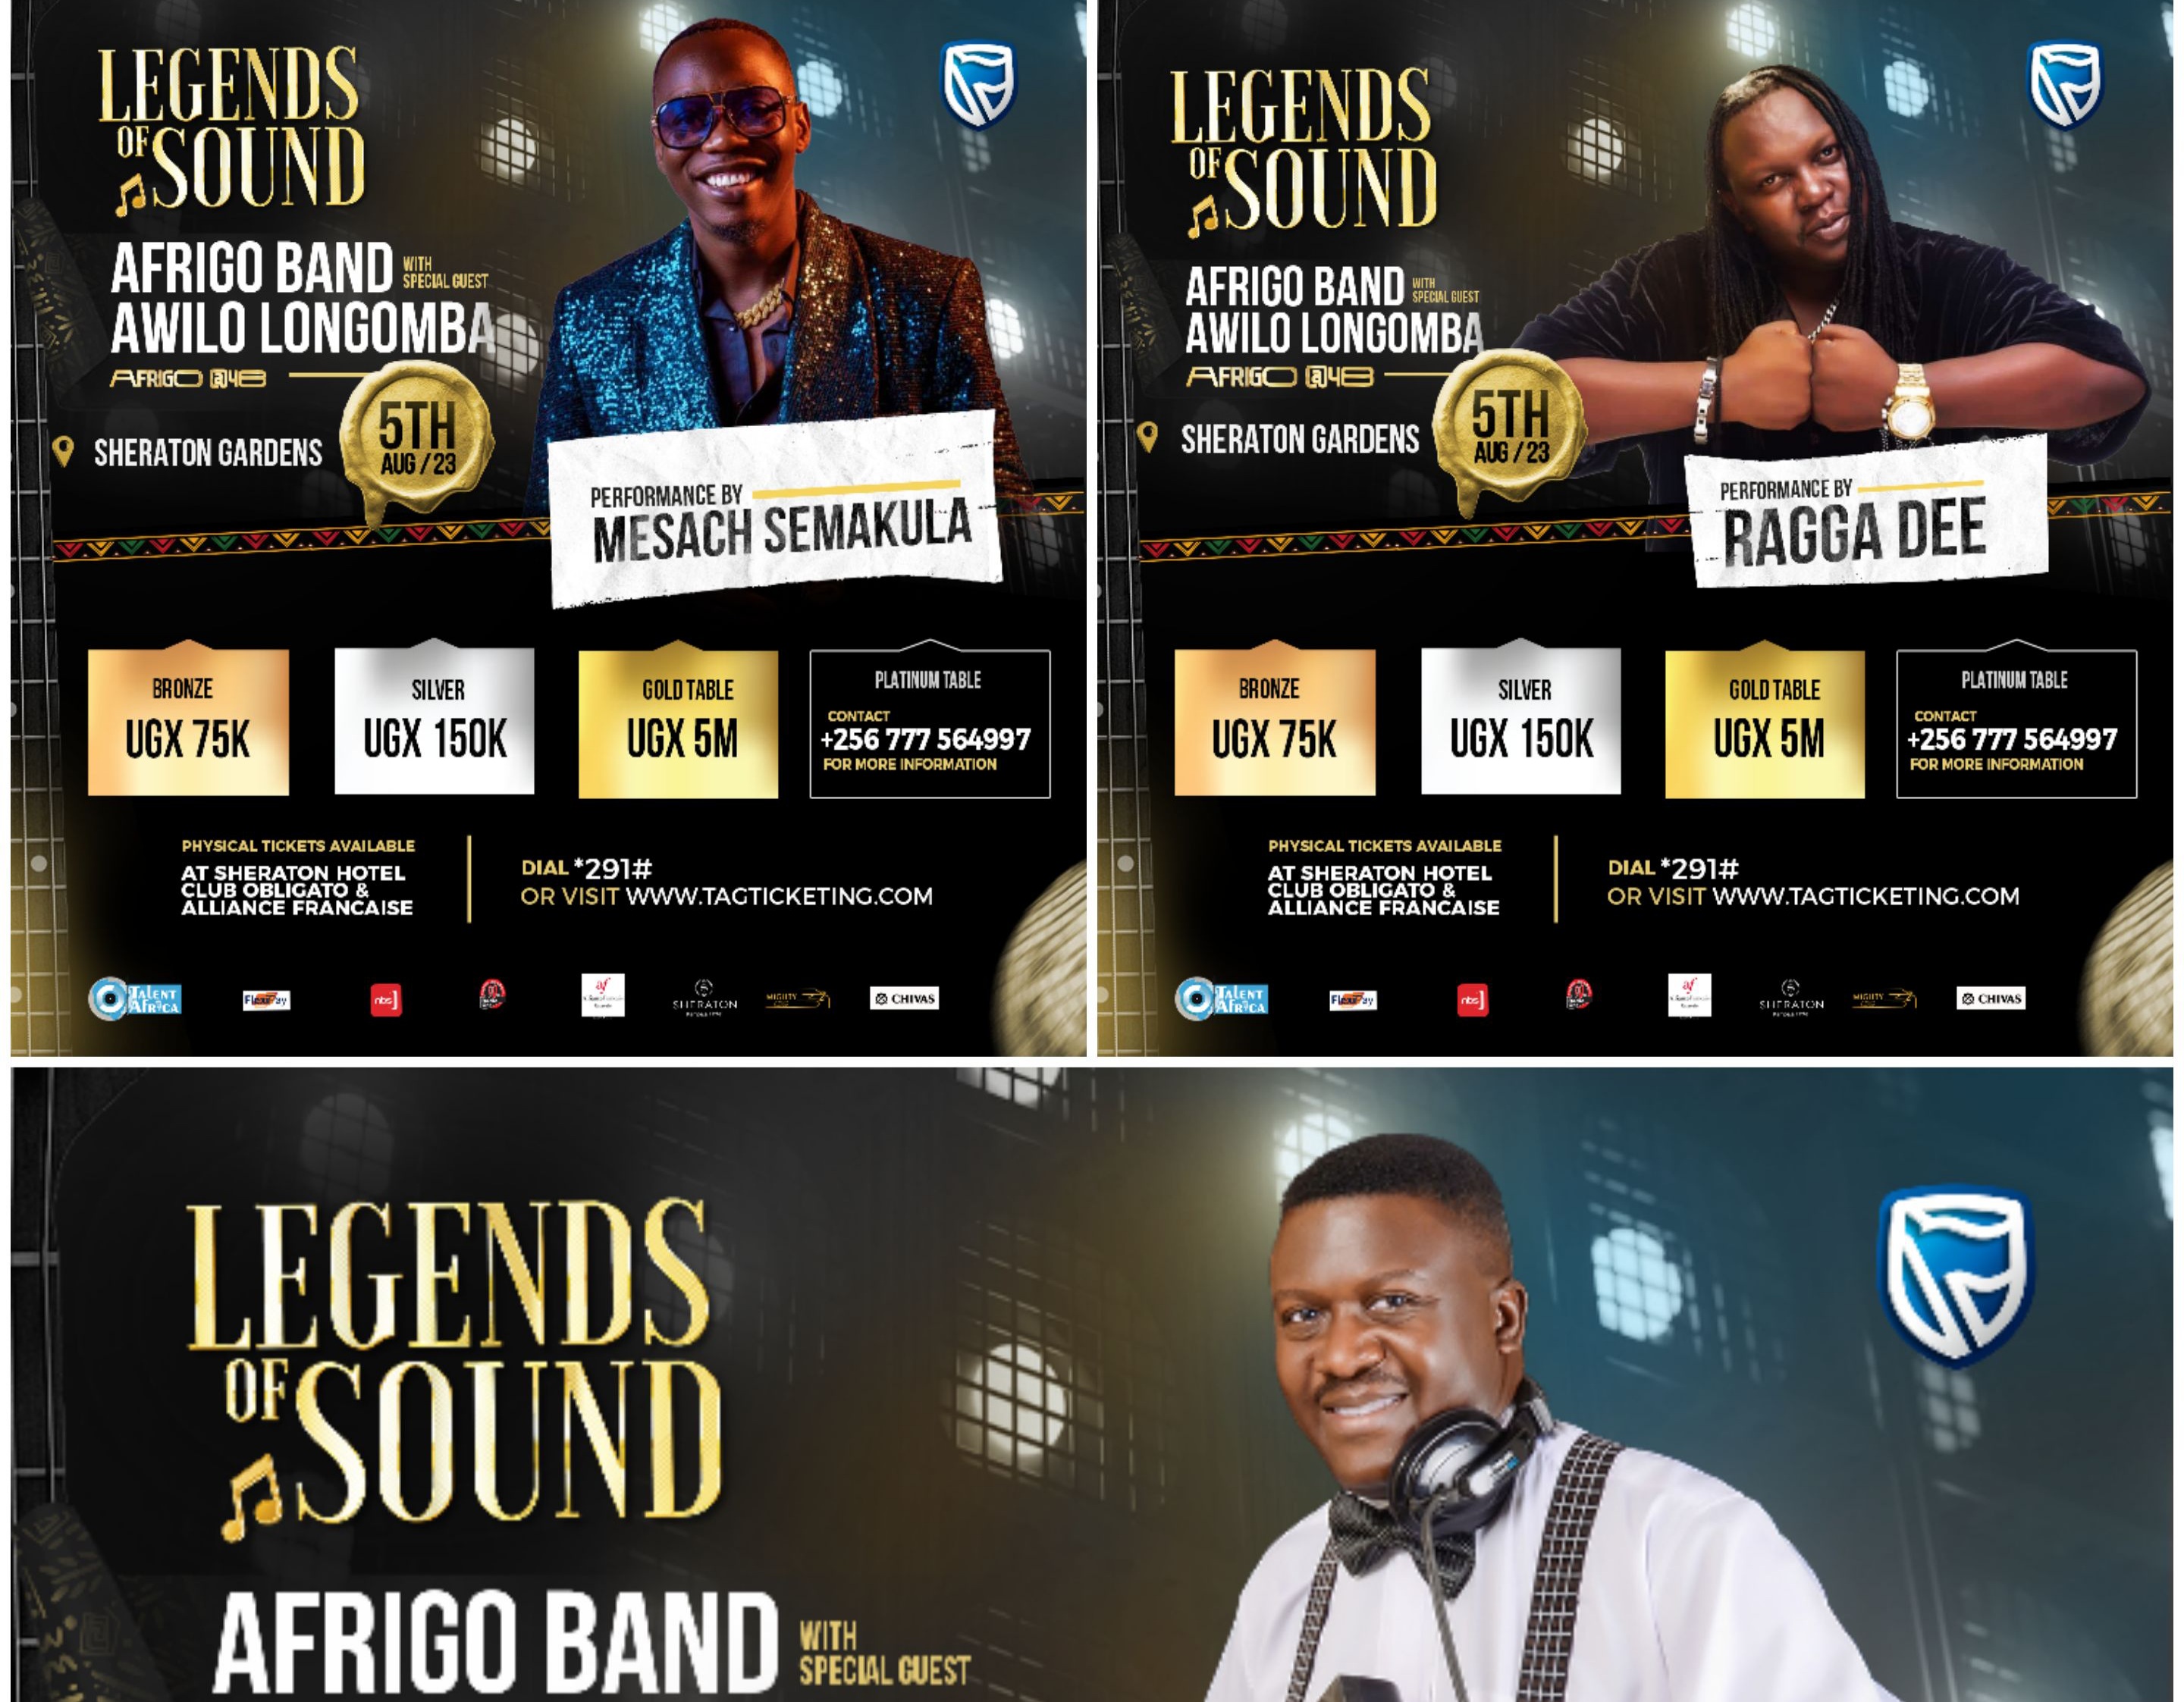 Ragga Dee, Mesach and DJ Alberto join Afrigo Band and Awilo Longomba in Legends of Sound Concert